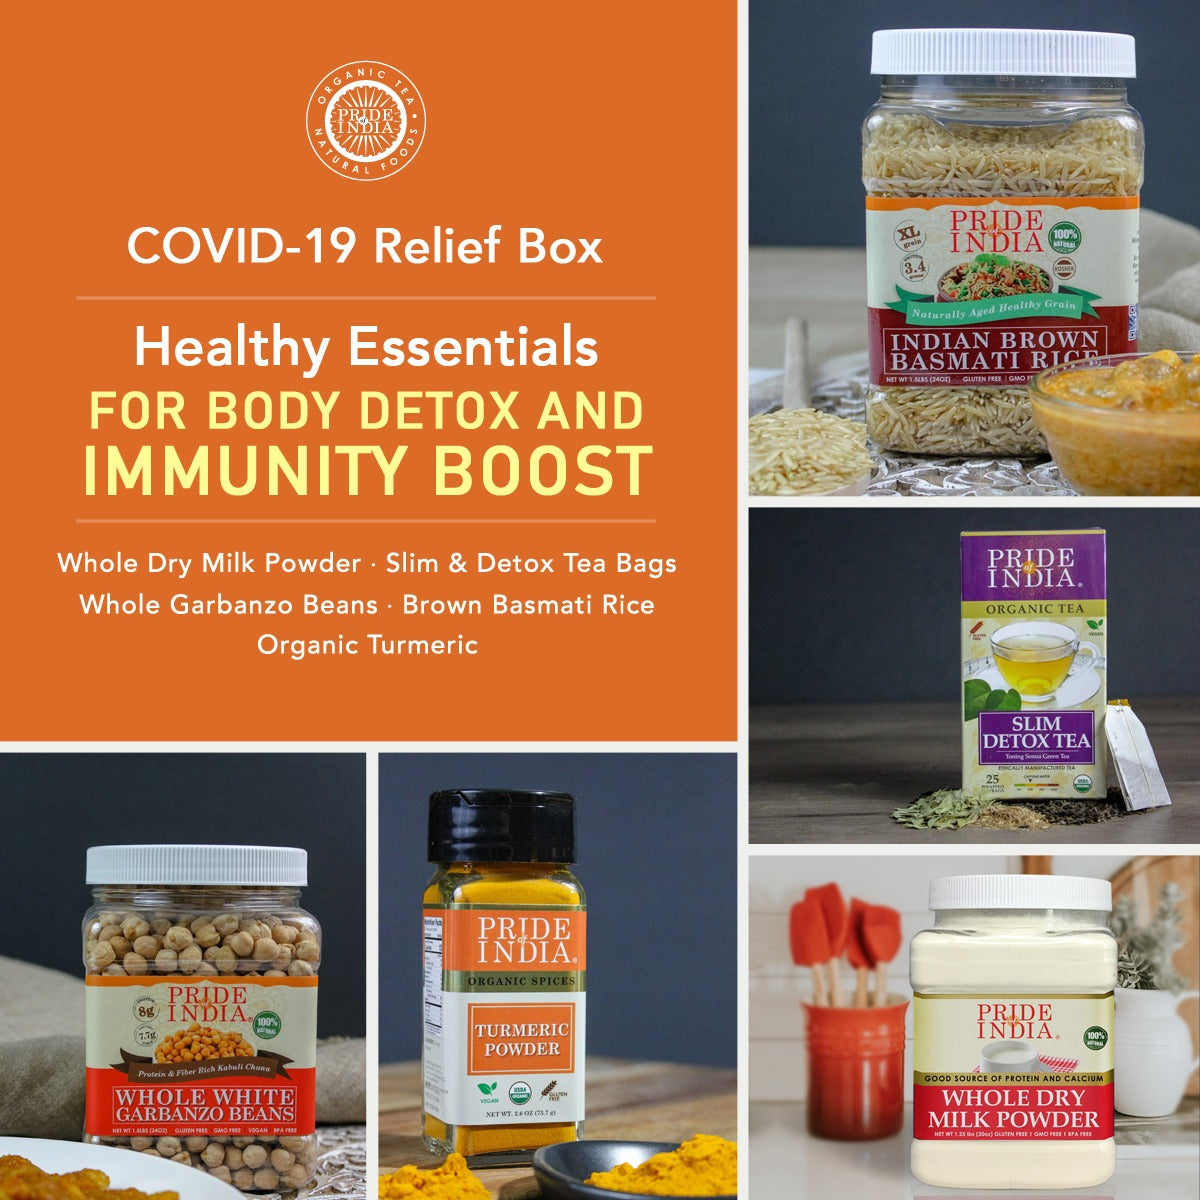 SPECIAL COVID-19 RELIEF BOX - MAY'S BOX OF THE MONTH